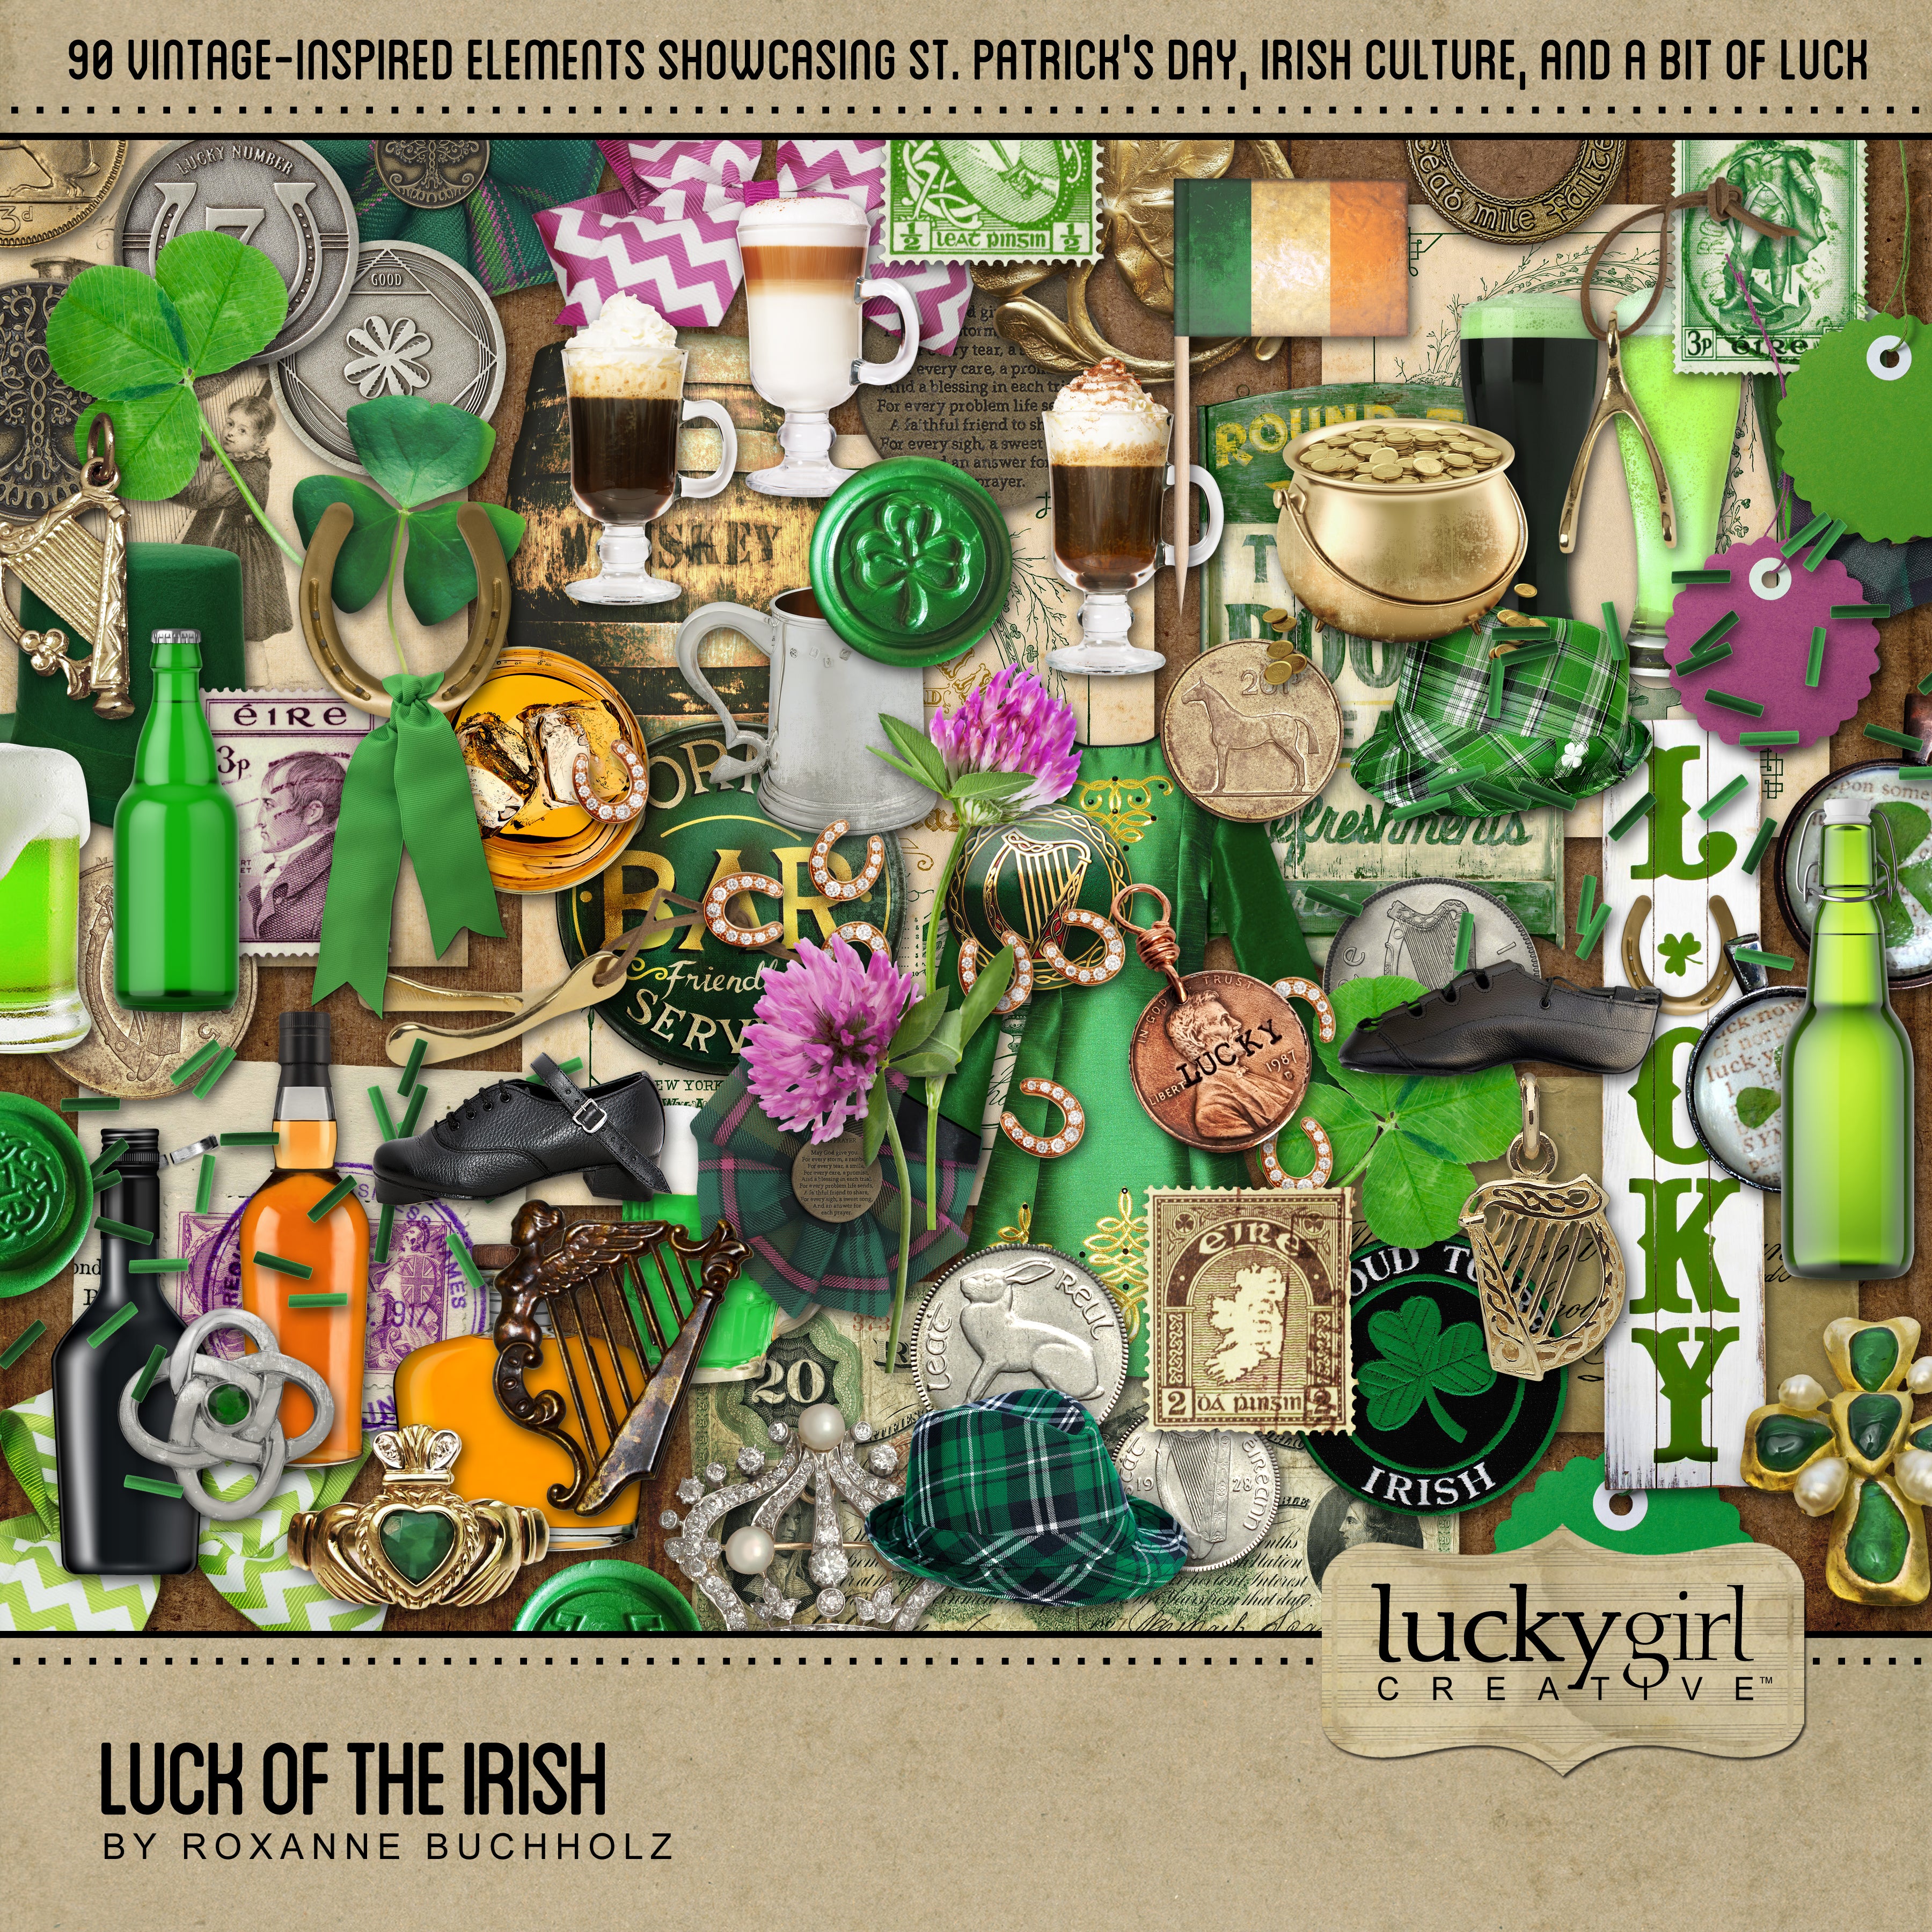 St. Patrick’s Day digital scrapbook kits by Lucky Girl Creative offer realistic scrapbook embellishments and digital papers. Show someone how lucky you are by documenting your love story or writing about your Irish heritage.